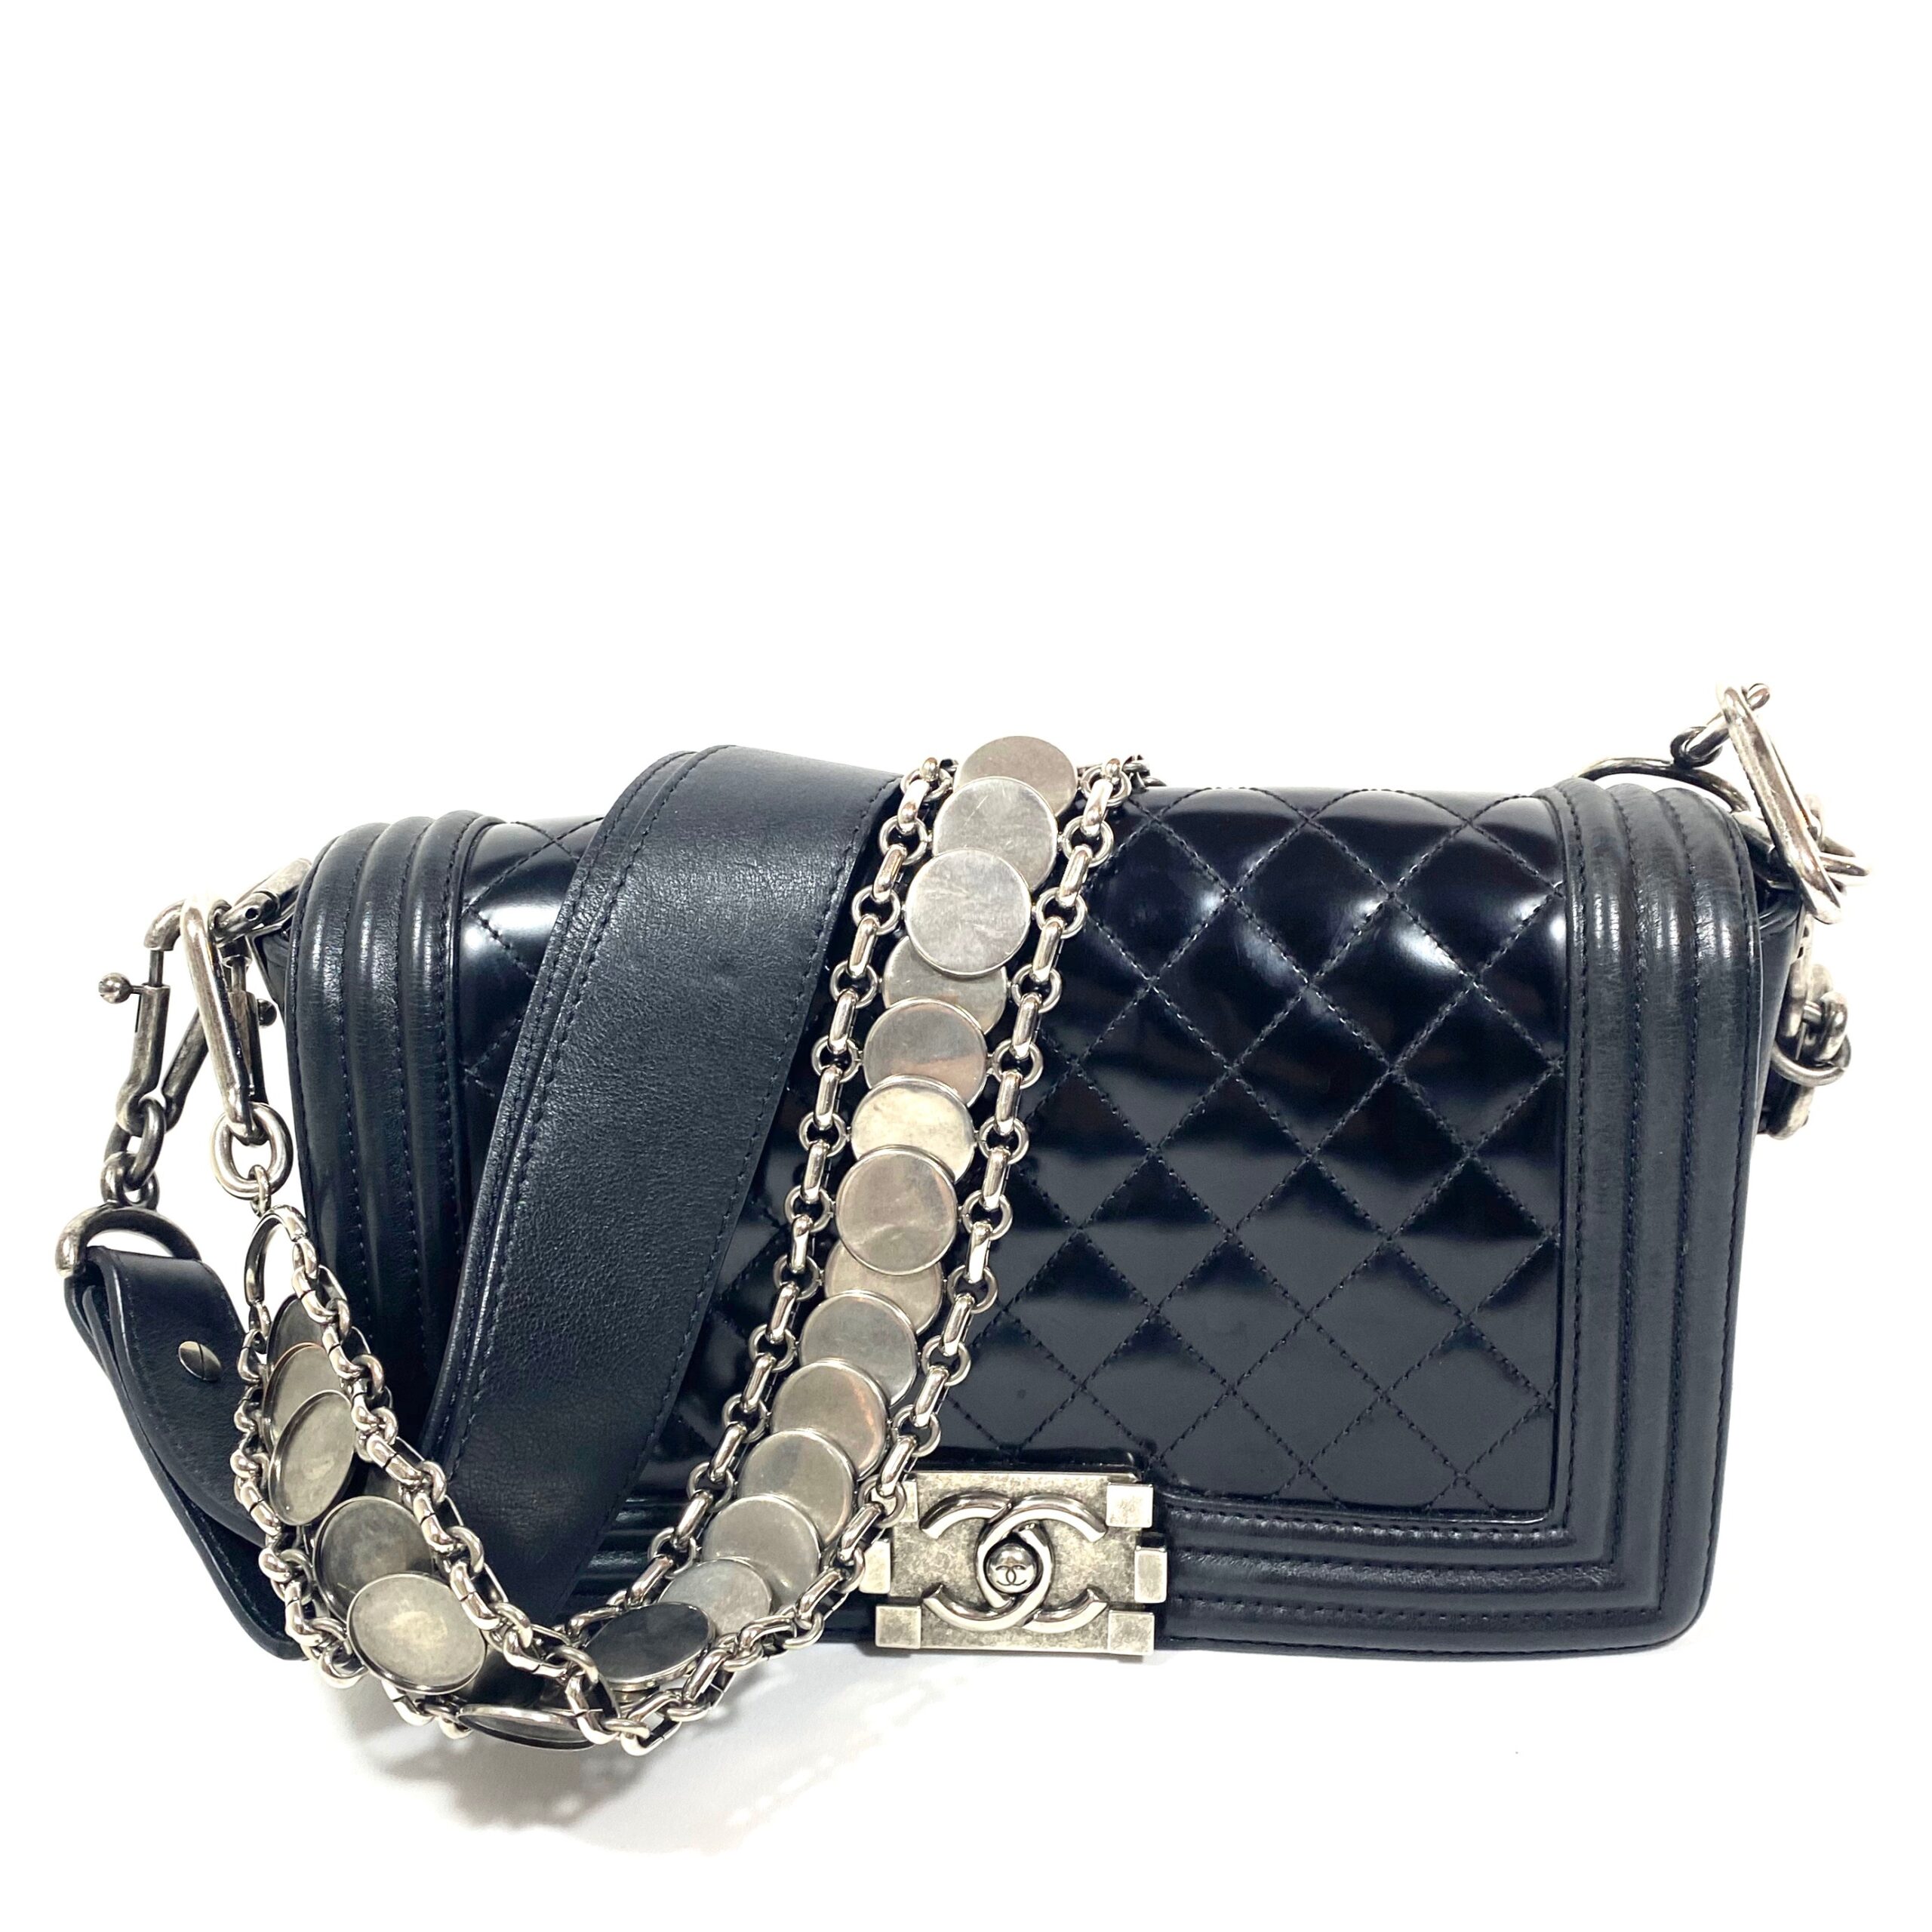 CHANEL MEDALLION OLD MEDIUM BLACK BOY BAG WITH BOTH CHAIN AND